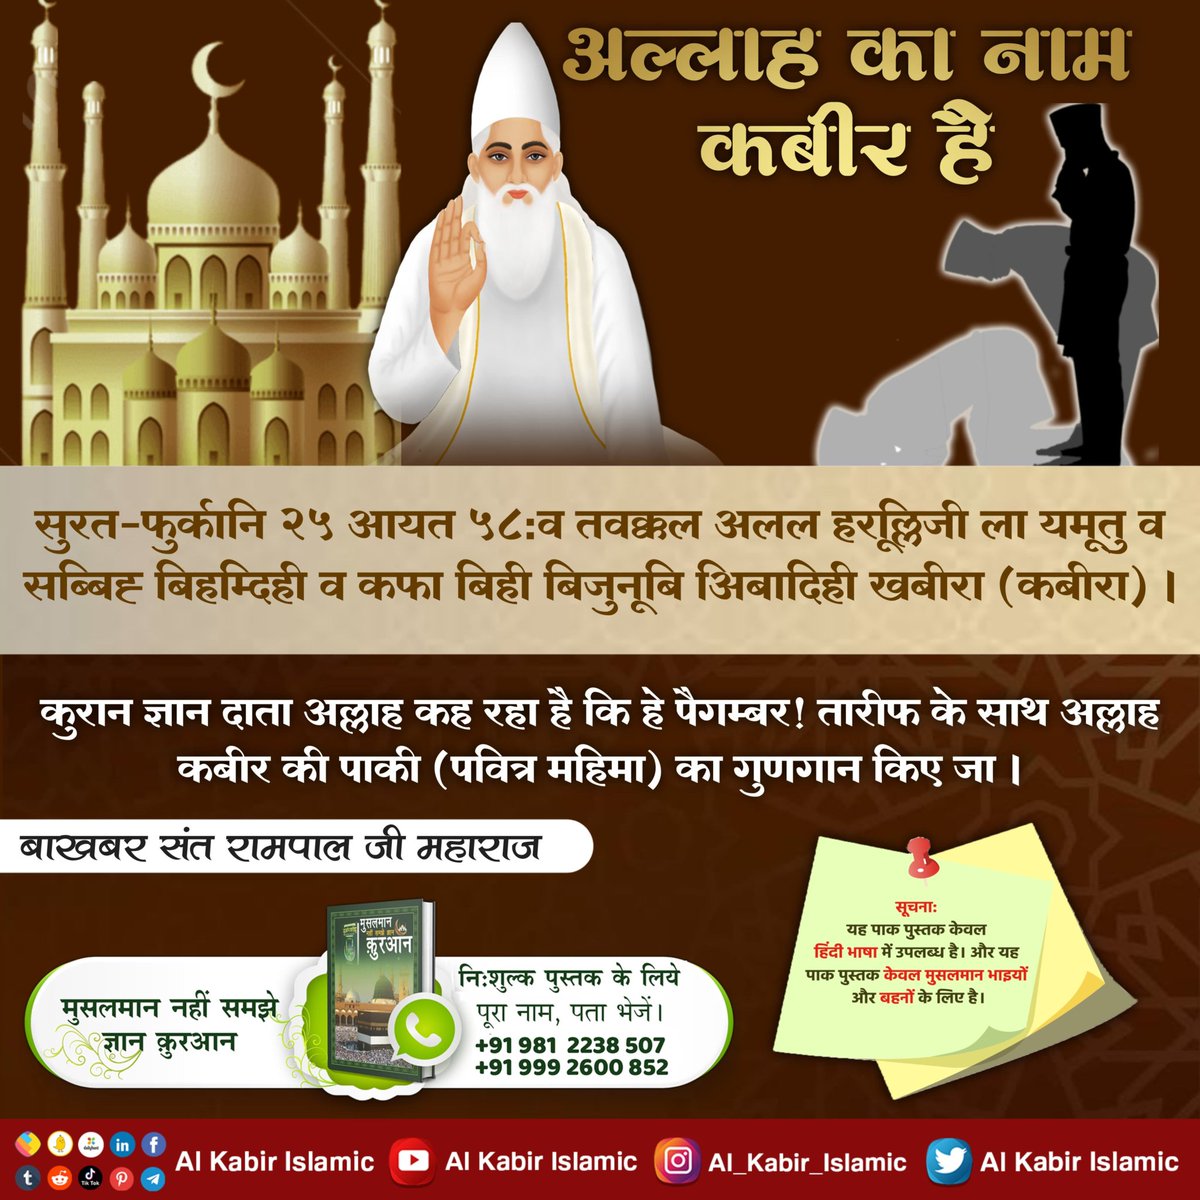 #GodMorningFriday
The name of Allah is Kabir!
Surat-Fuqarqani 25 Verse 58: Quran Knowledge giver Allah is saying that O Prophet! Sing the praise of the purity (holy glory) of Allah Kabir with praise.
Visit Saint Rampal Ji Maharaj YouTube Channel 
#FridayMotivation